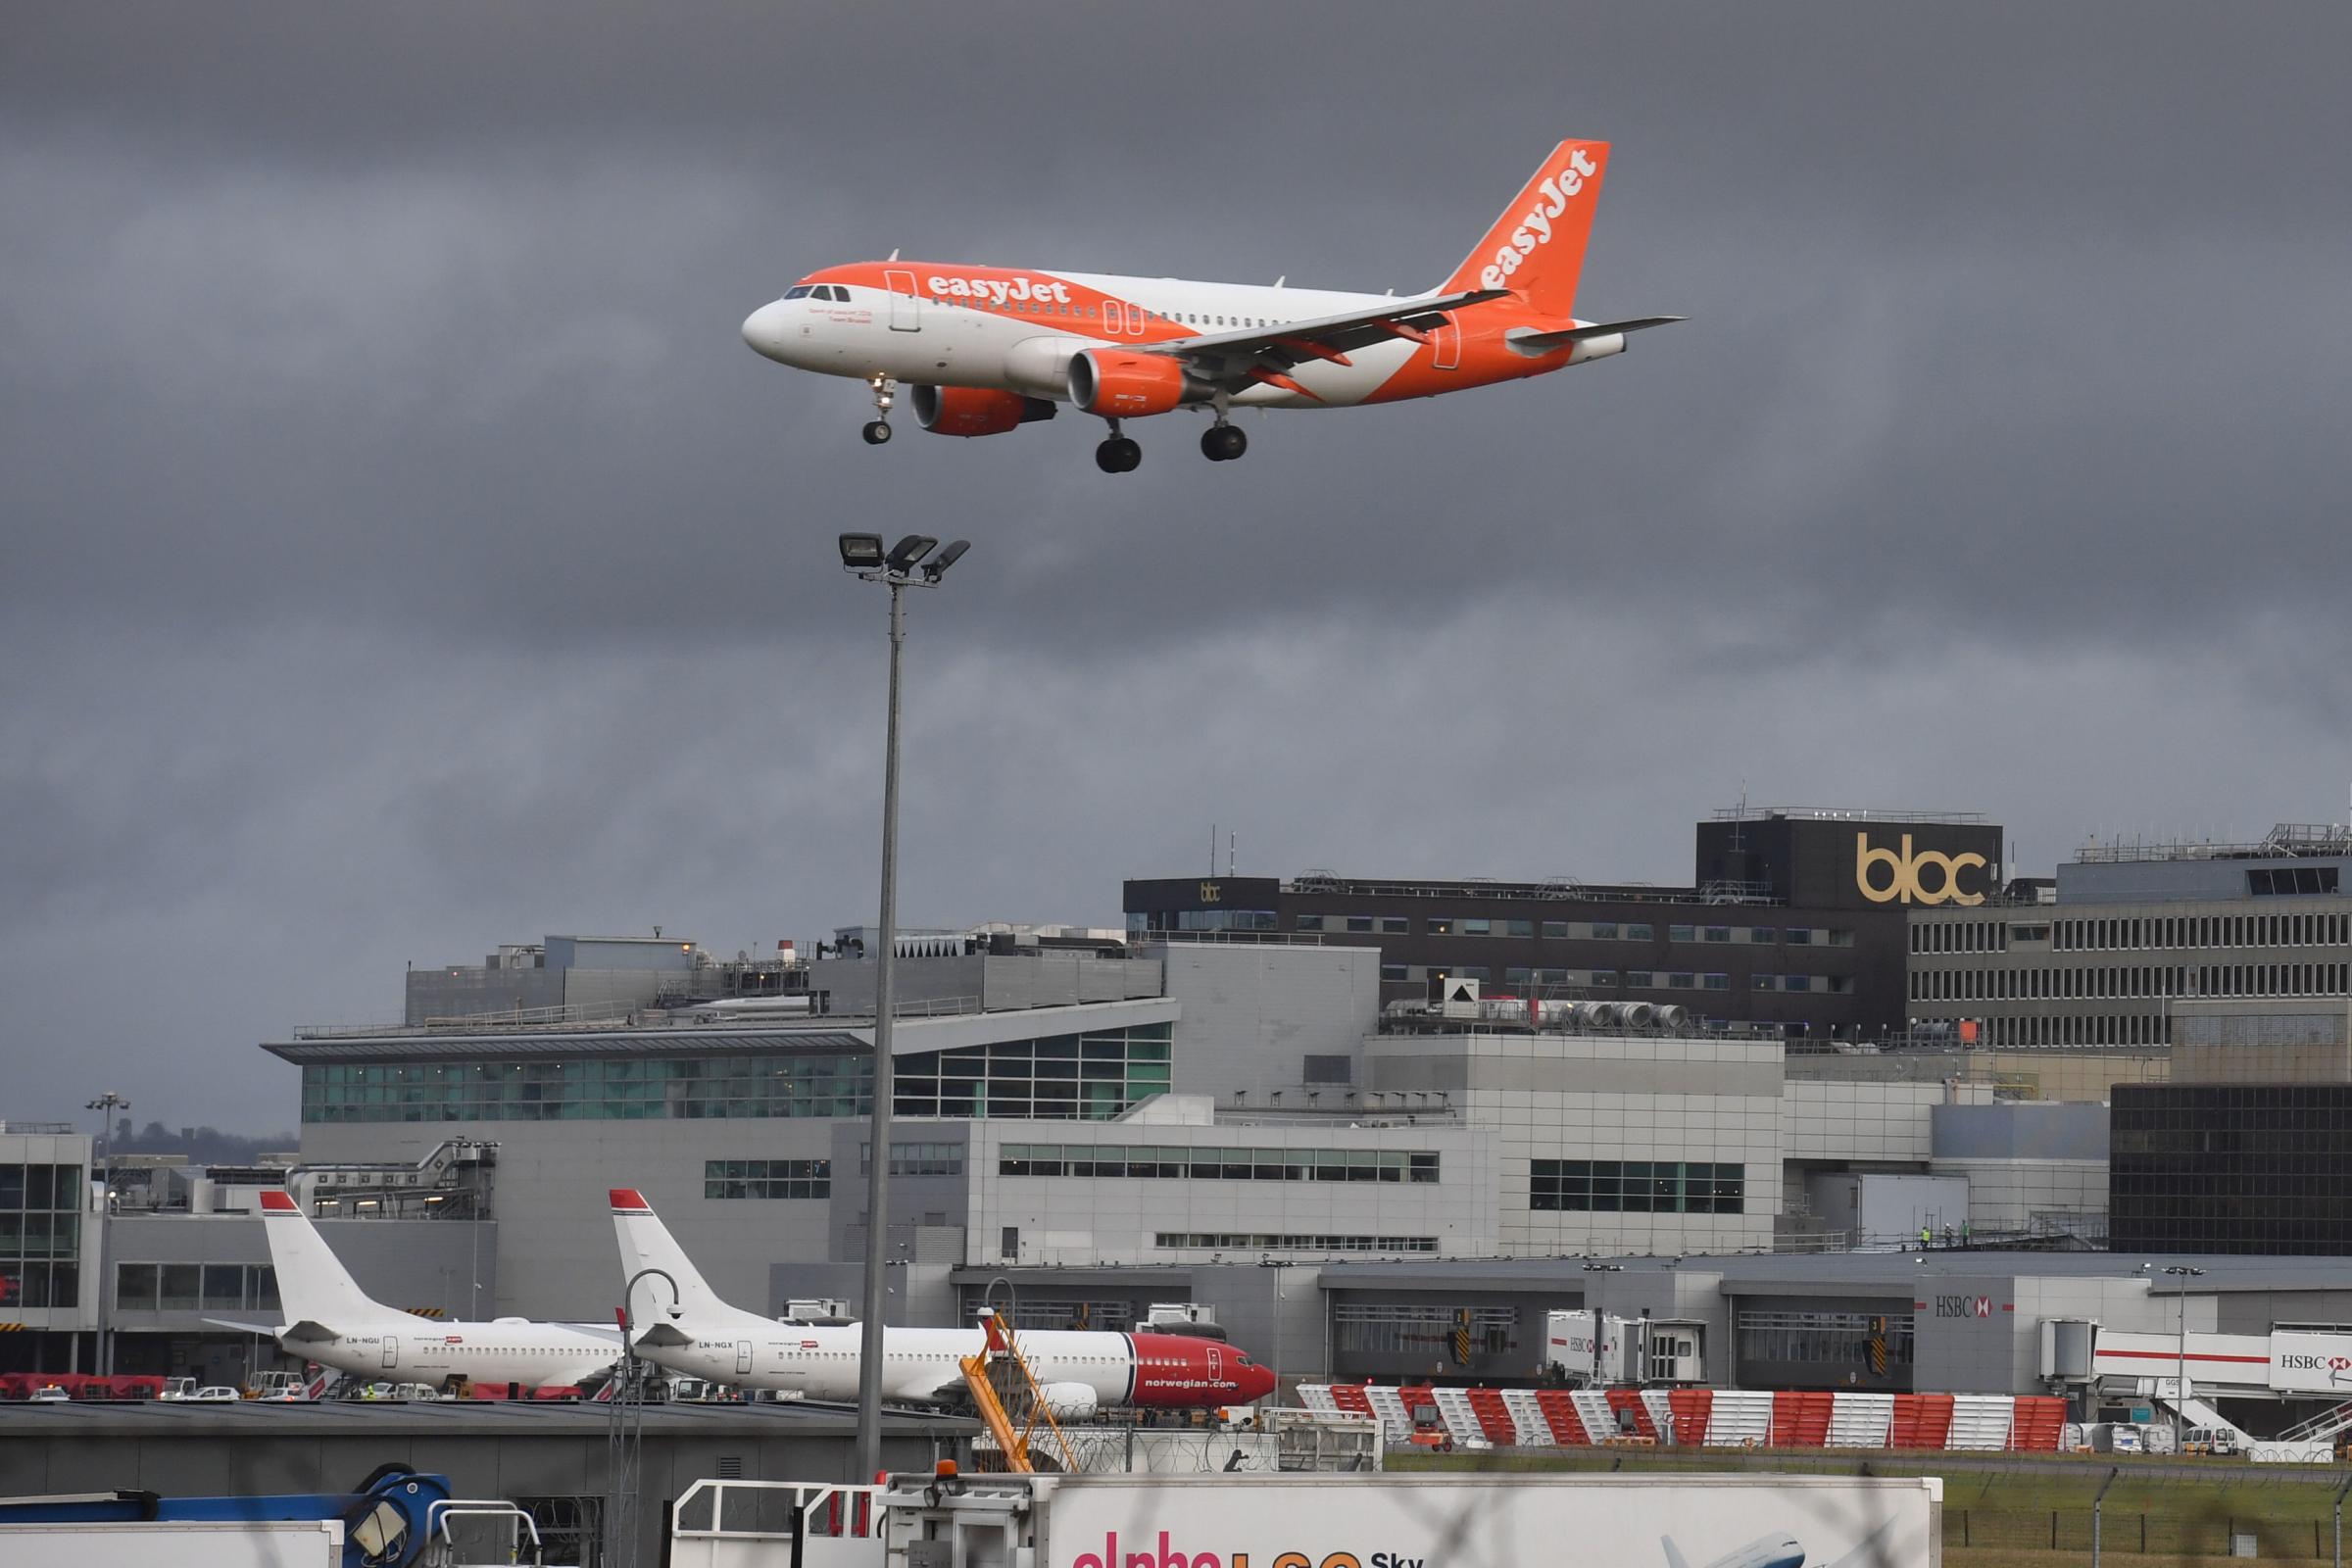 An EasyJet plane on its final approach before landing at Gatwick airport, which has been closed after drones were spotted over the airfield Wednesday night and throughout Thursday. PRESS ASSOCIATION Photo. Picture date: Friday December 21, 2018. See PA